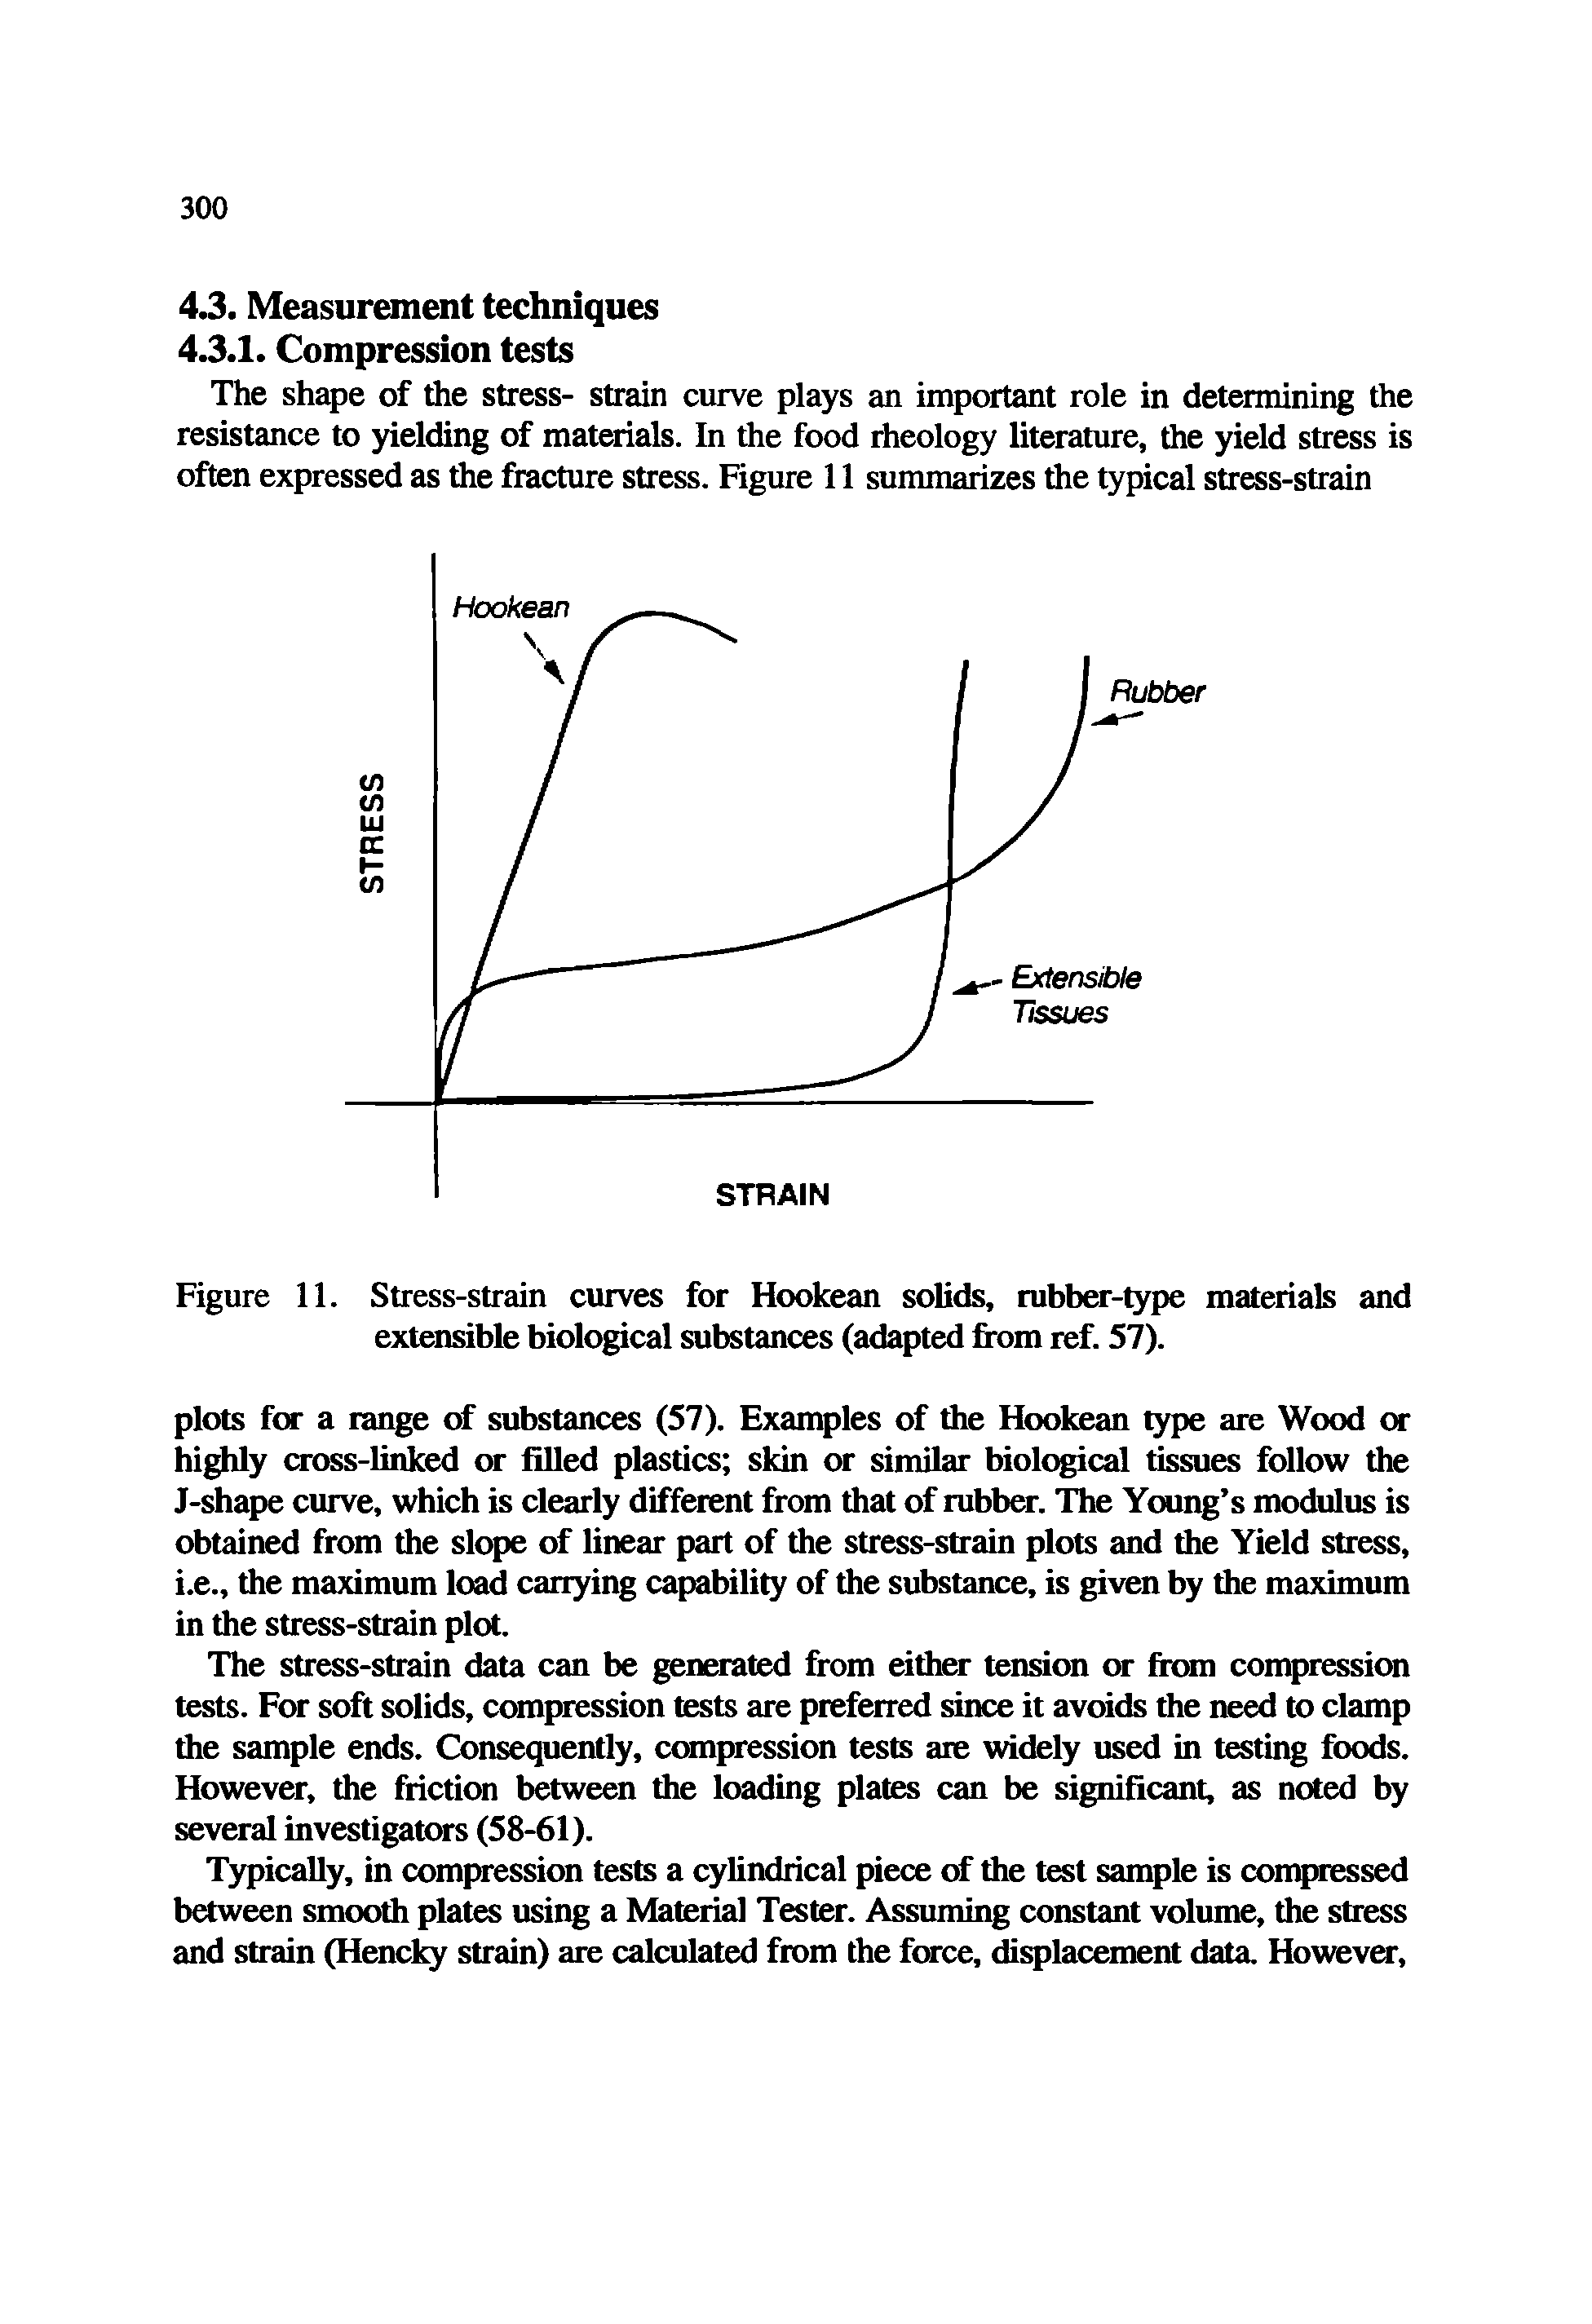 Figure 11. Stress-strain curves for Hookean solids, rubber-type materials and extensible biological substances (adapted from ref. 57).